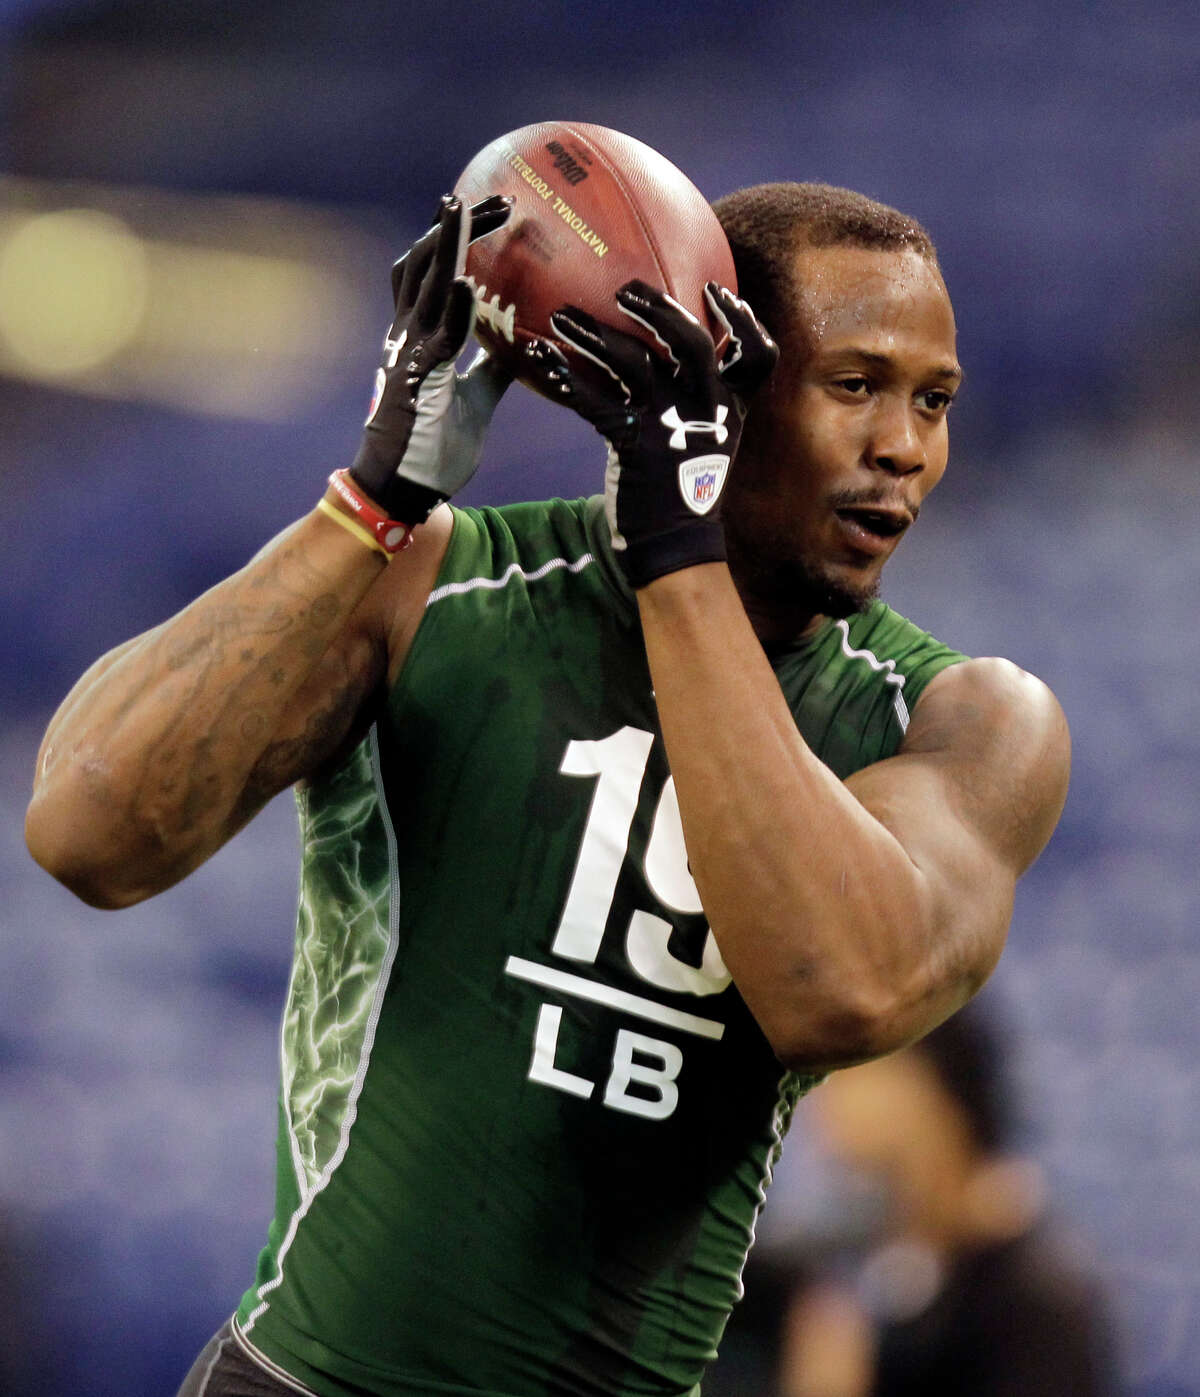 Texas A&M linebacker Von Miller makes a catch at the NFL Scouting Combine in Indianapolis on Monday.